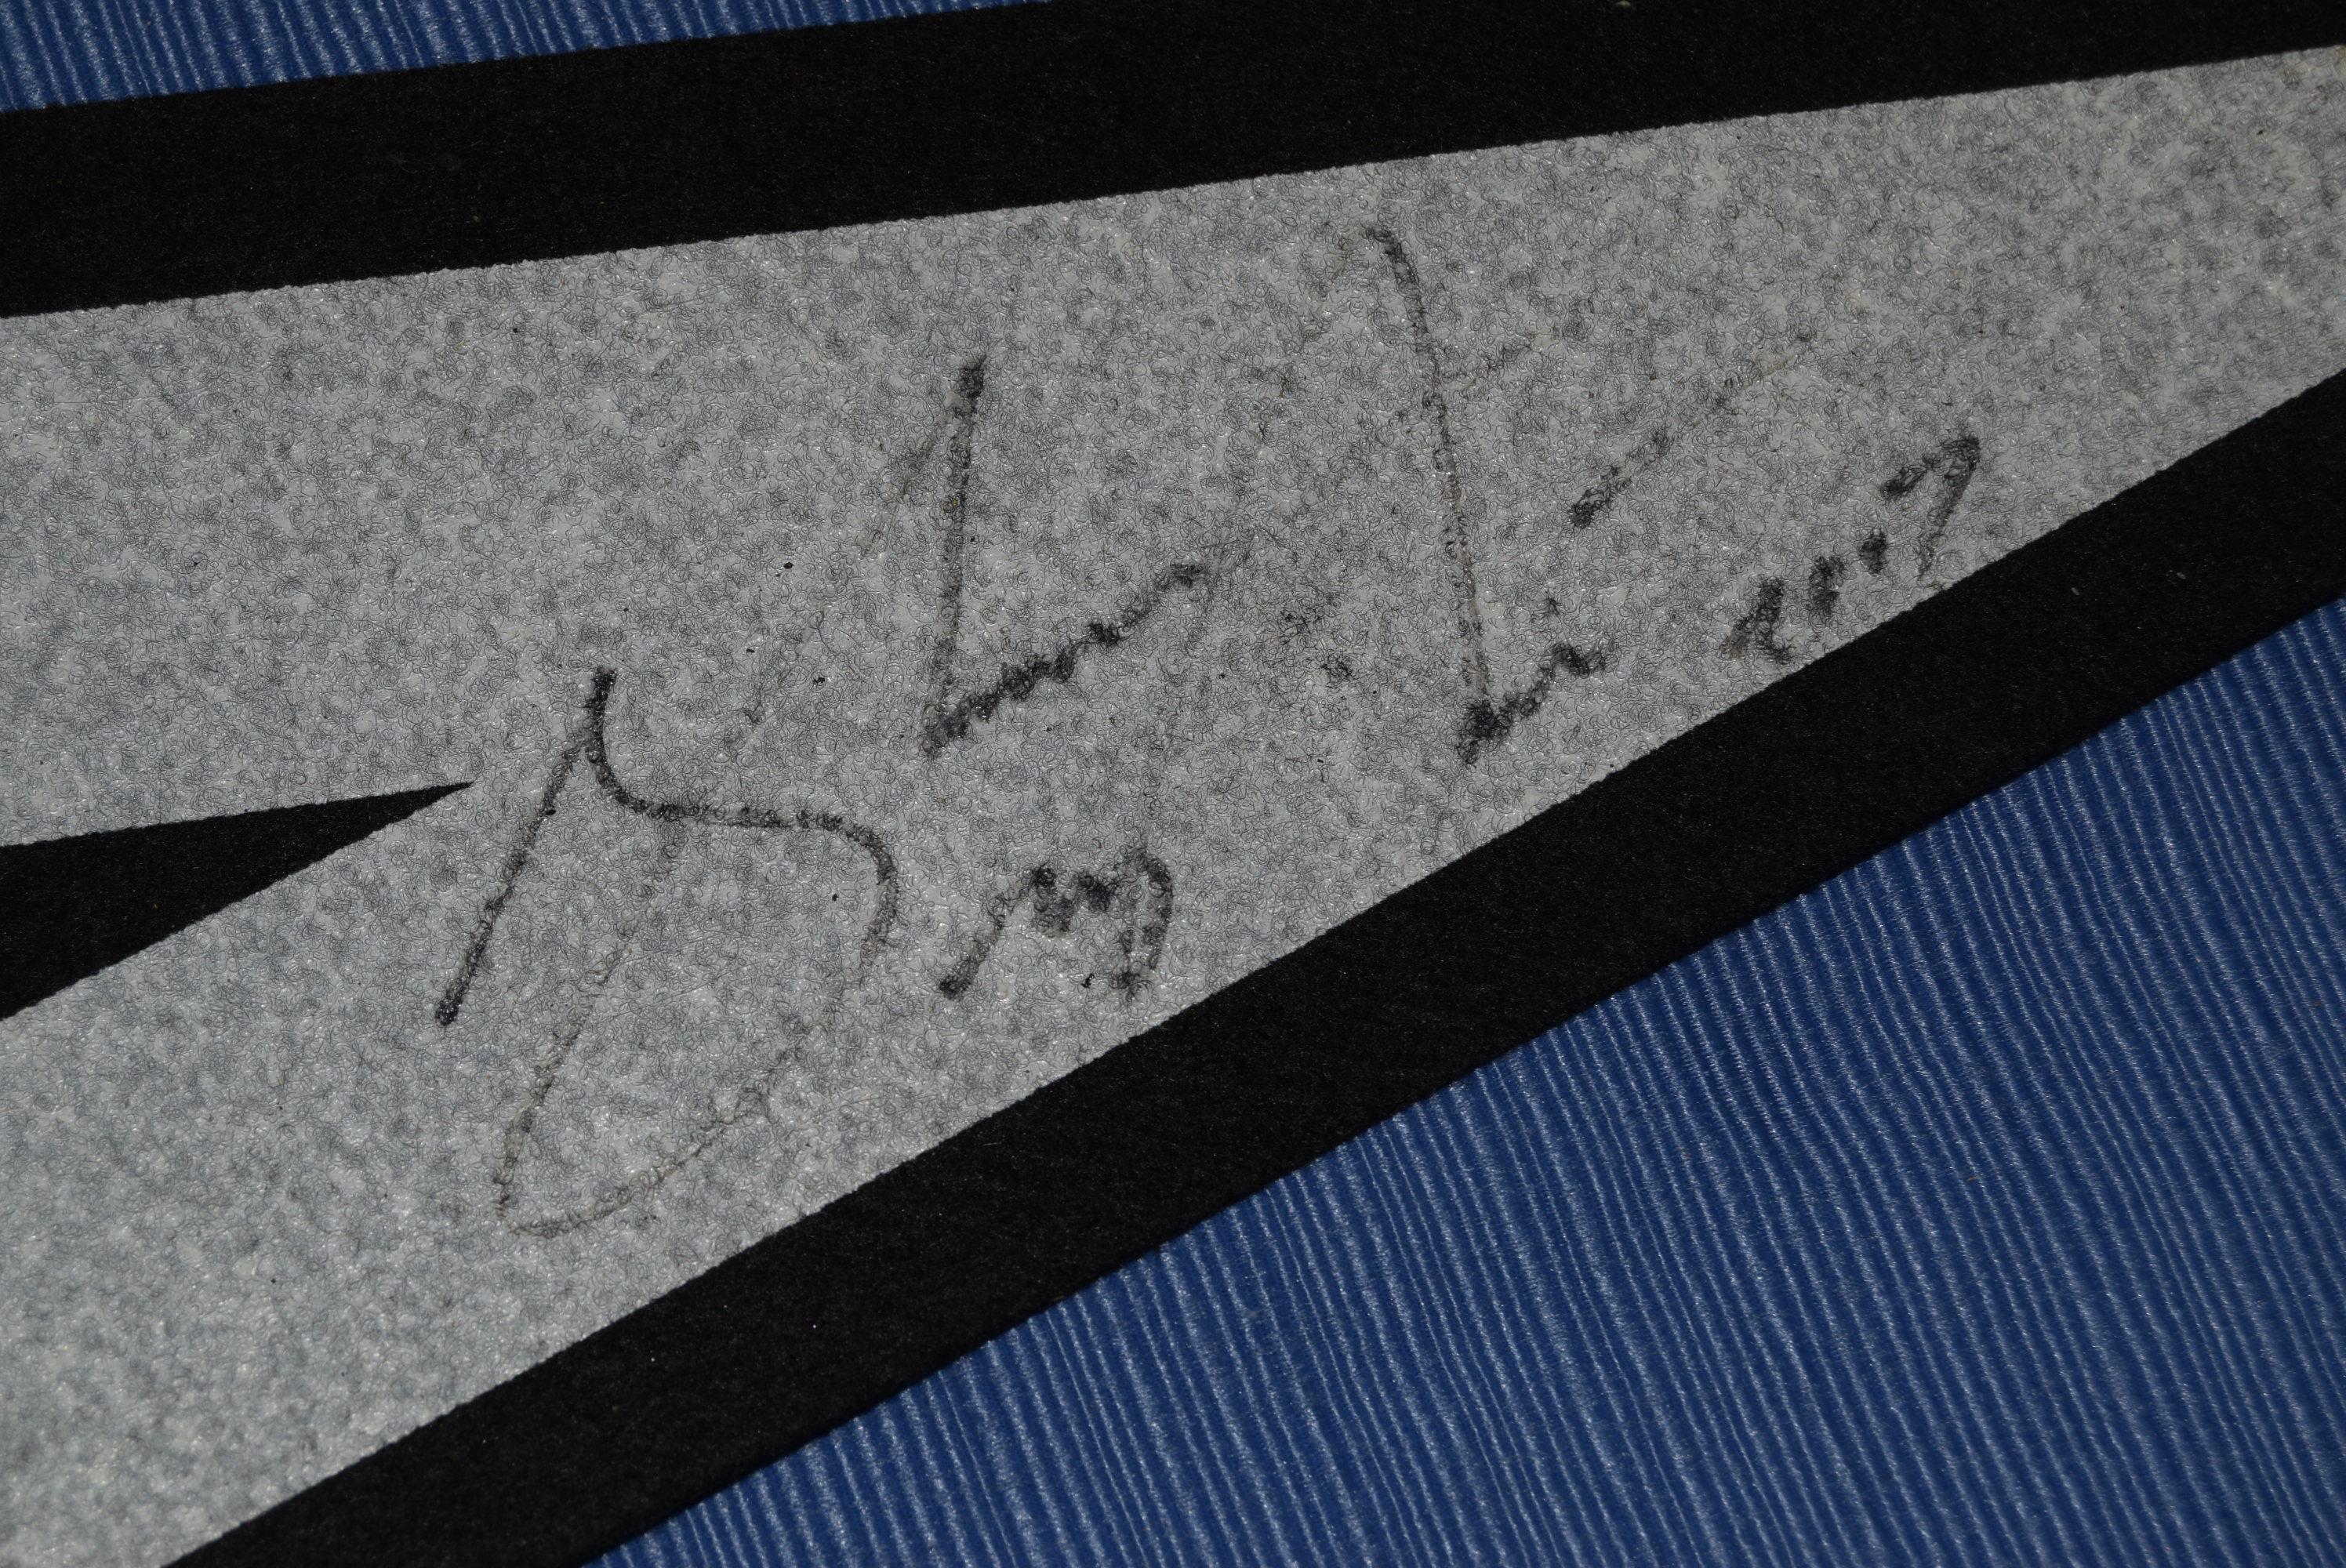 SHAWN WHITE AUTOGRAPHED PENNANT!